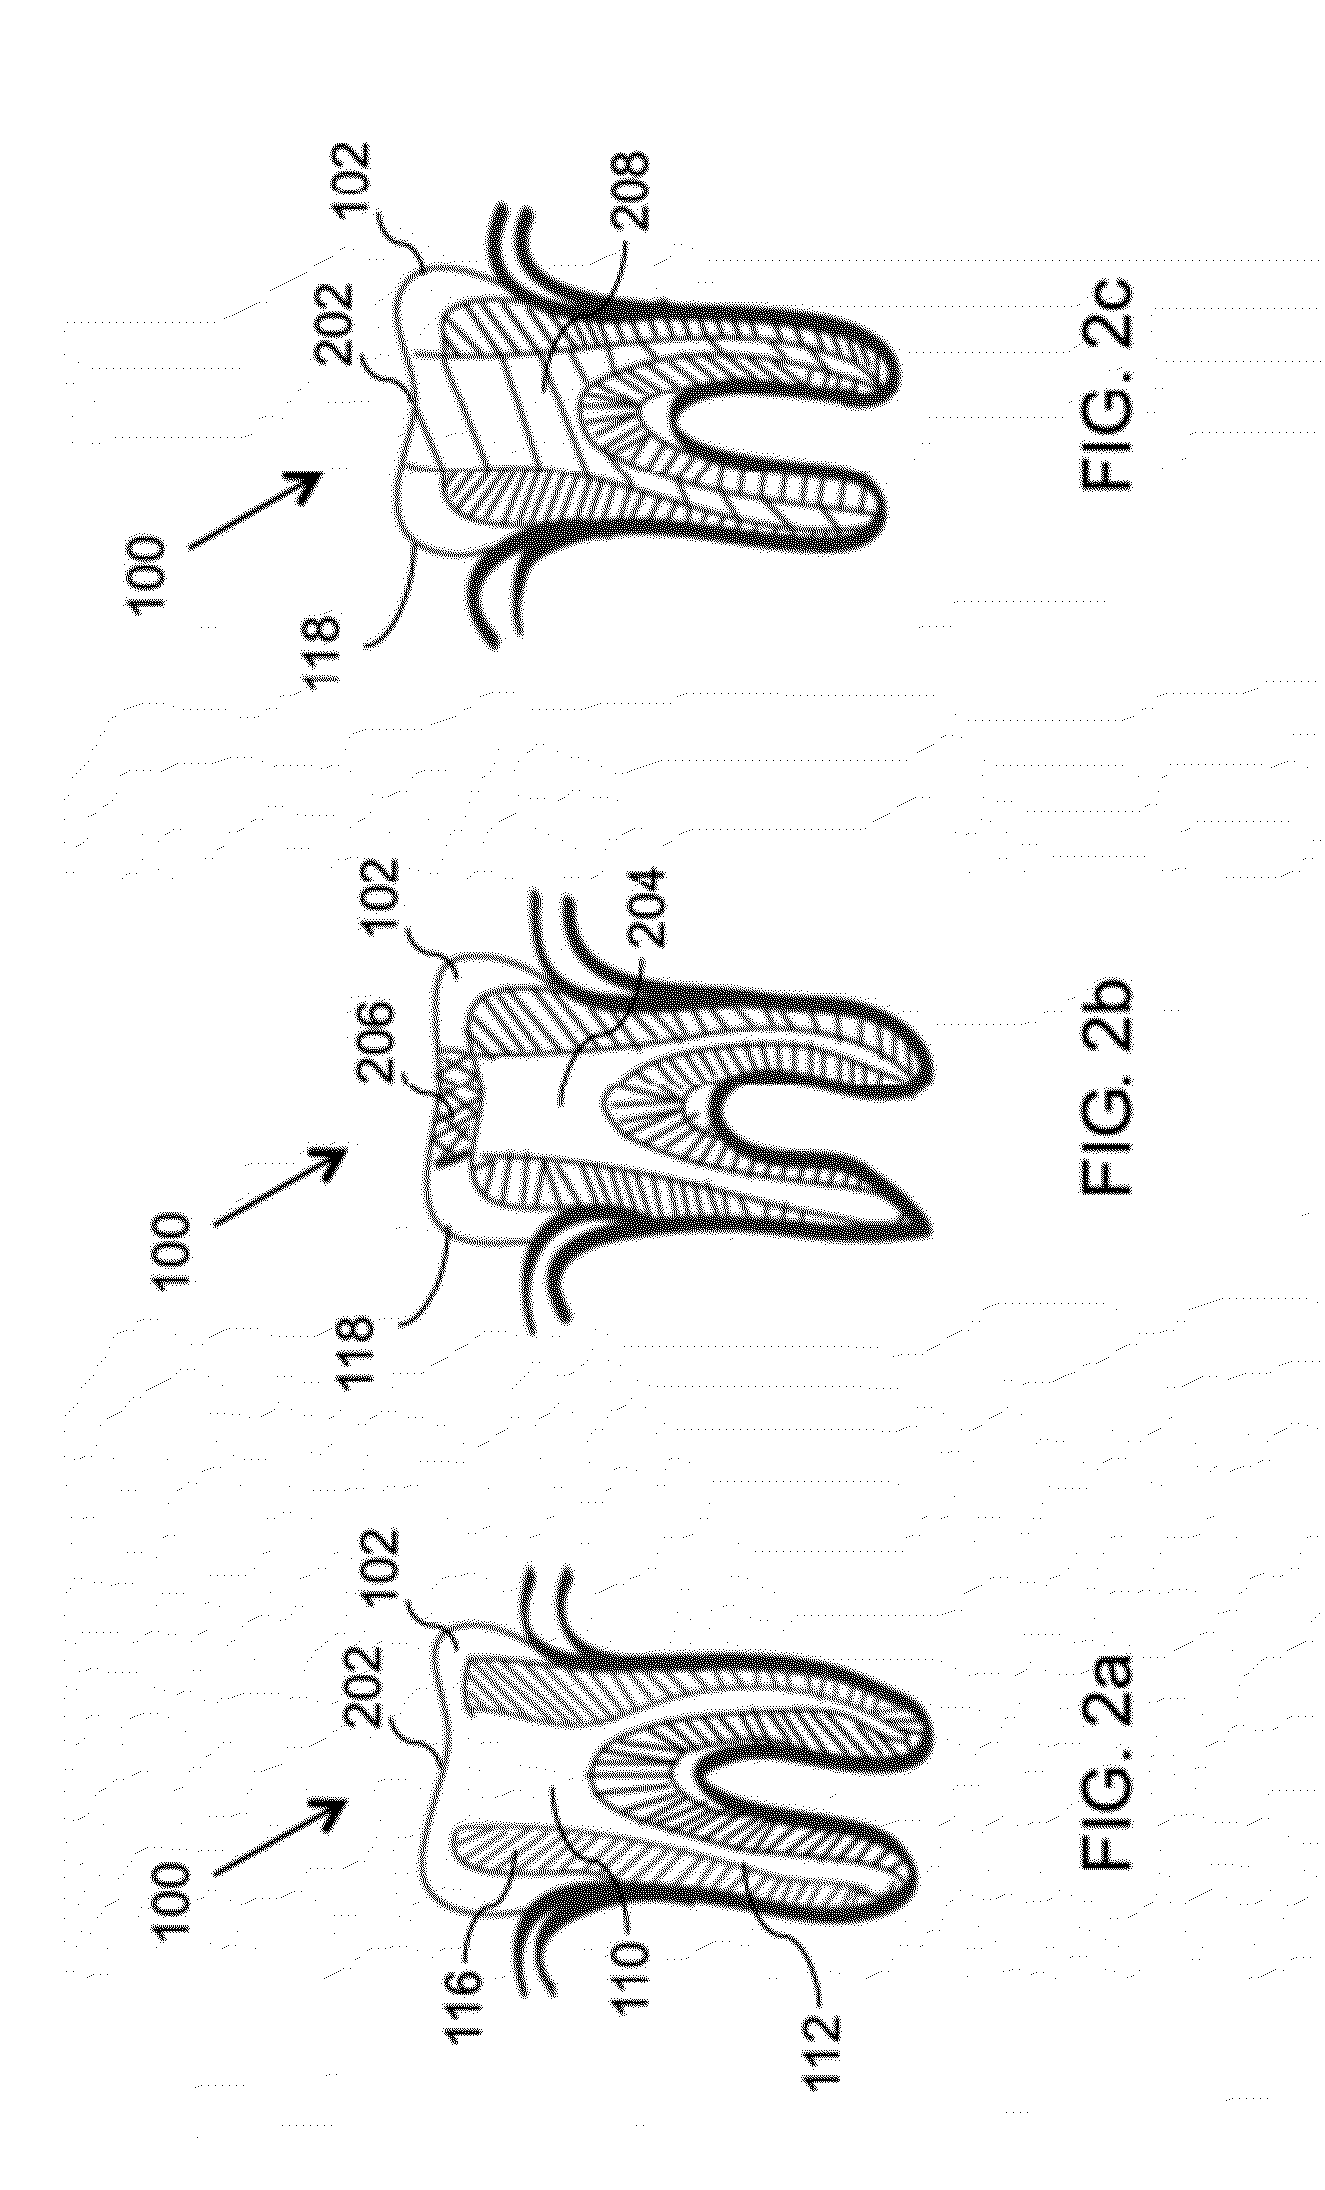 Devices and methods for intraoral controlled drug release